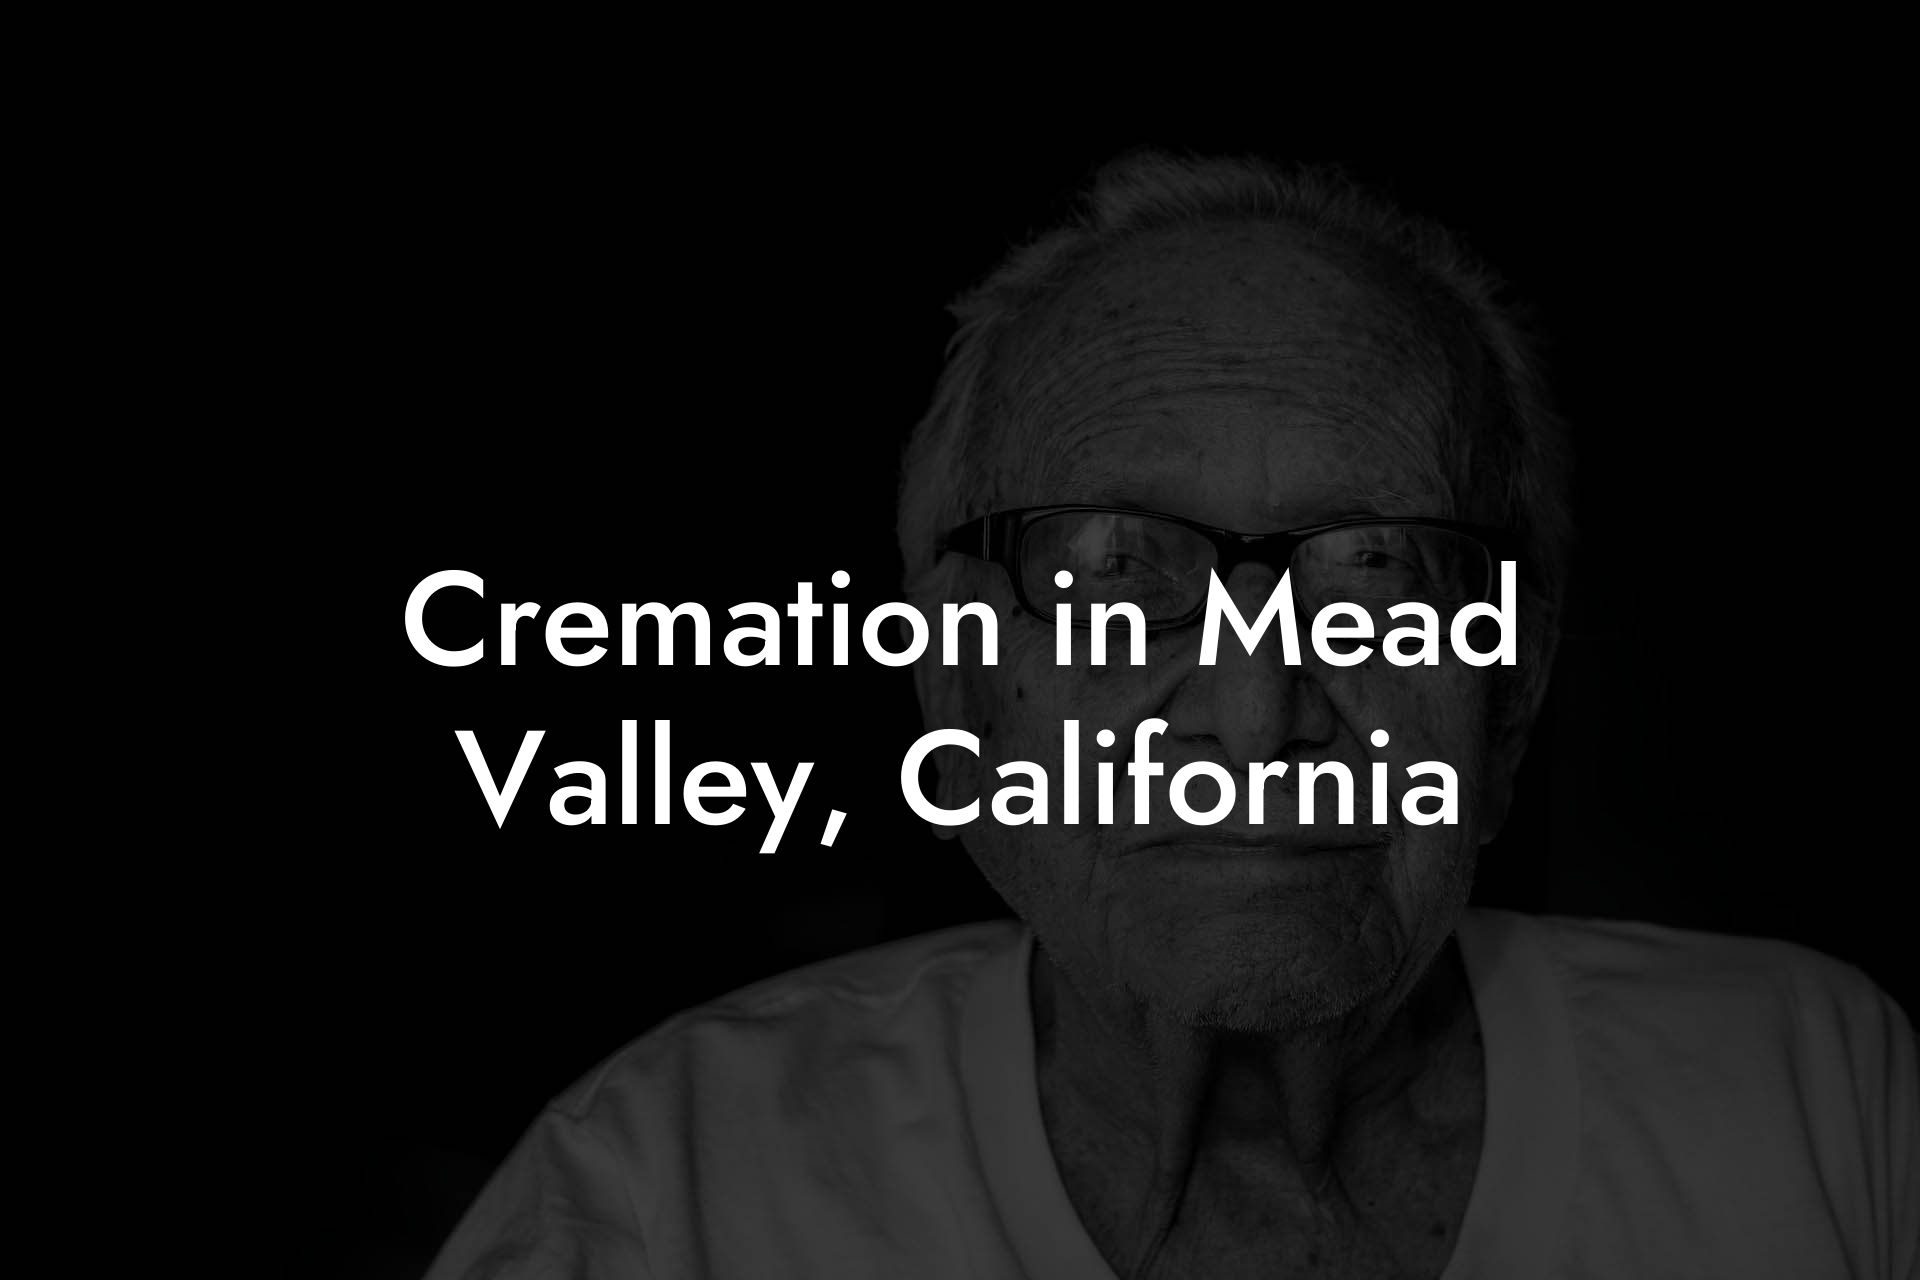 Cremation in Mead Valley, California